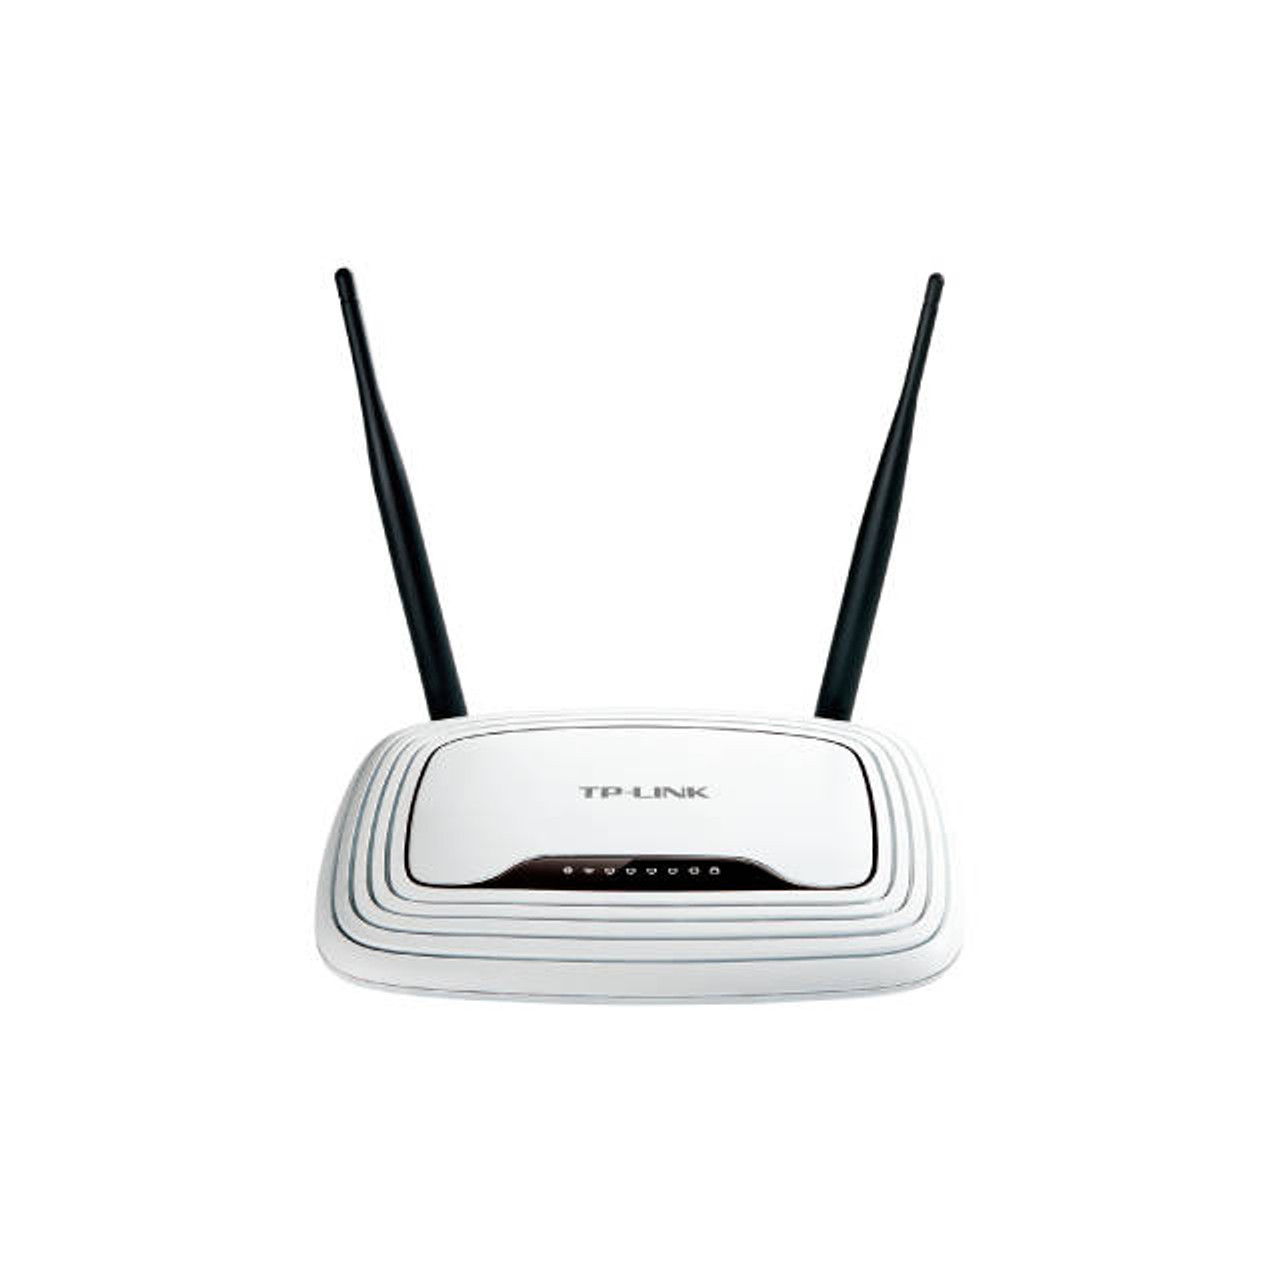 TP-Link TL-WR841N 300Mbps Wireless N Router w/ 2x Fixed 5dBi Antennas